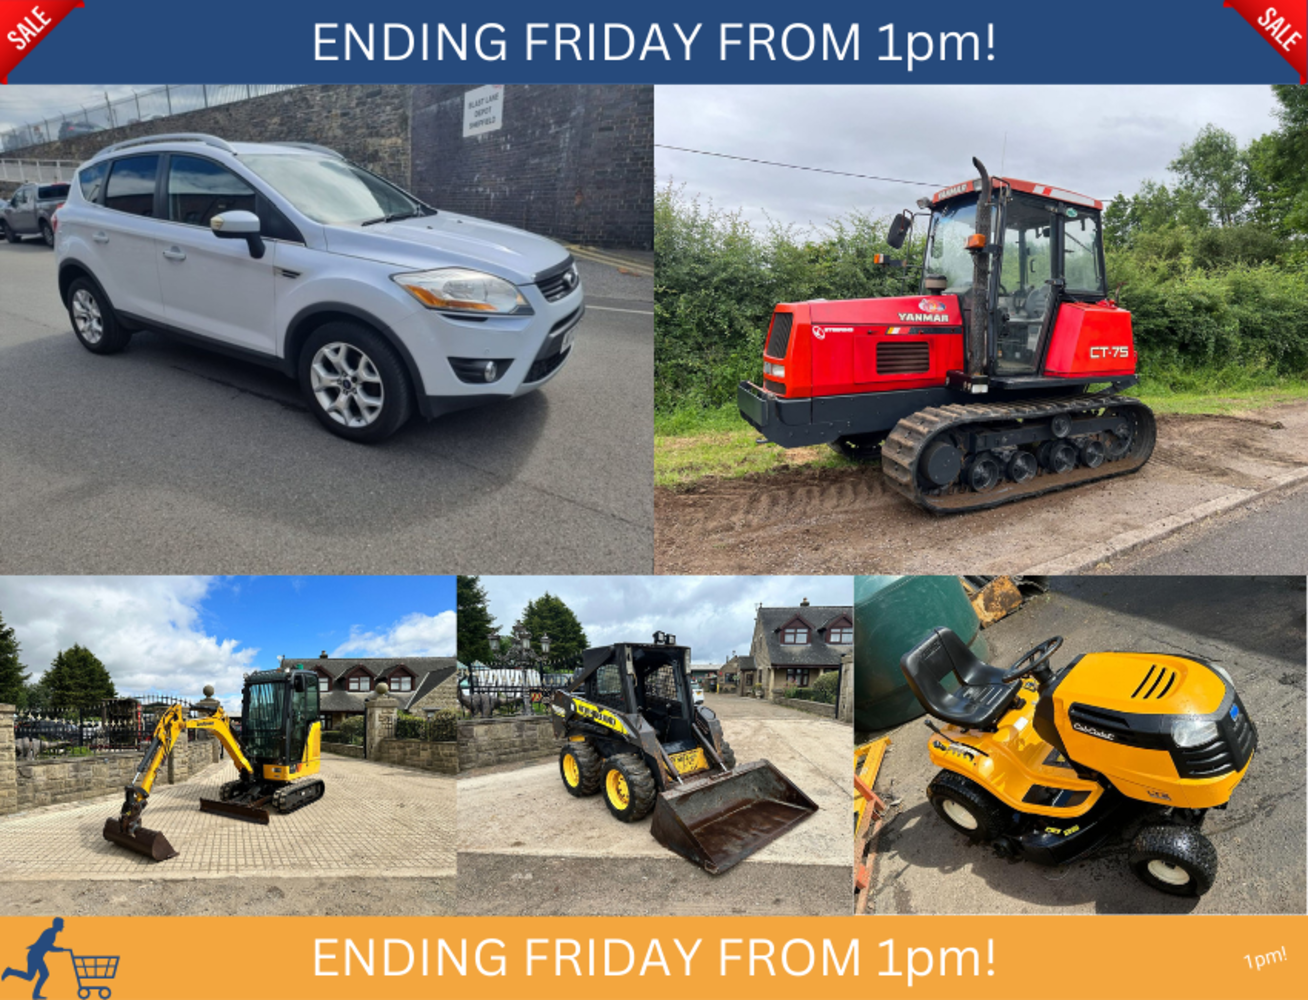 1pm FRIDAY SALE! 4WD COMPACT TRACTOR, NEW 2023 STIGA MOWER, FORKLIFTS, 8X8 VEHICLE, BALERS, ROLLERS, DIGGERS, VANS, PLANT & MACHINERY + MORE